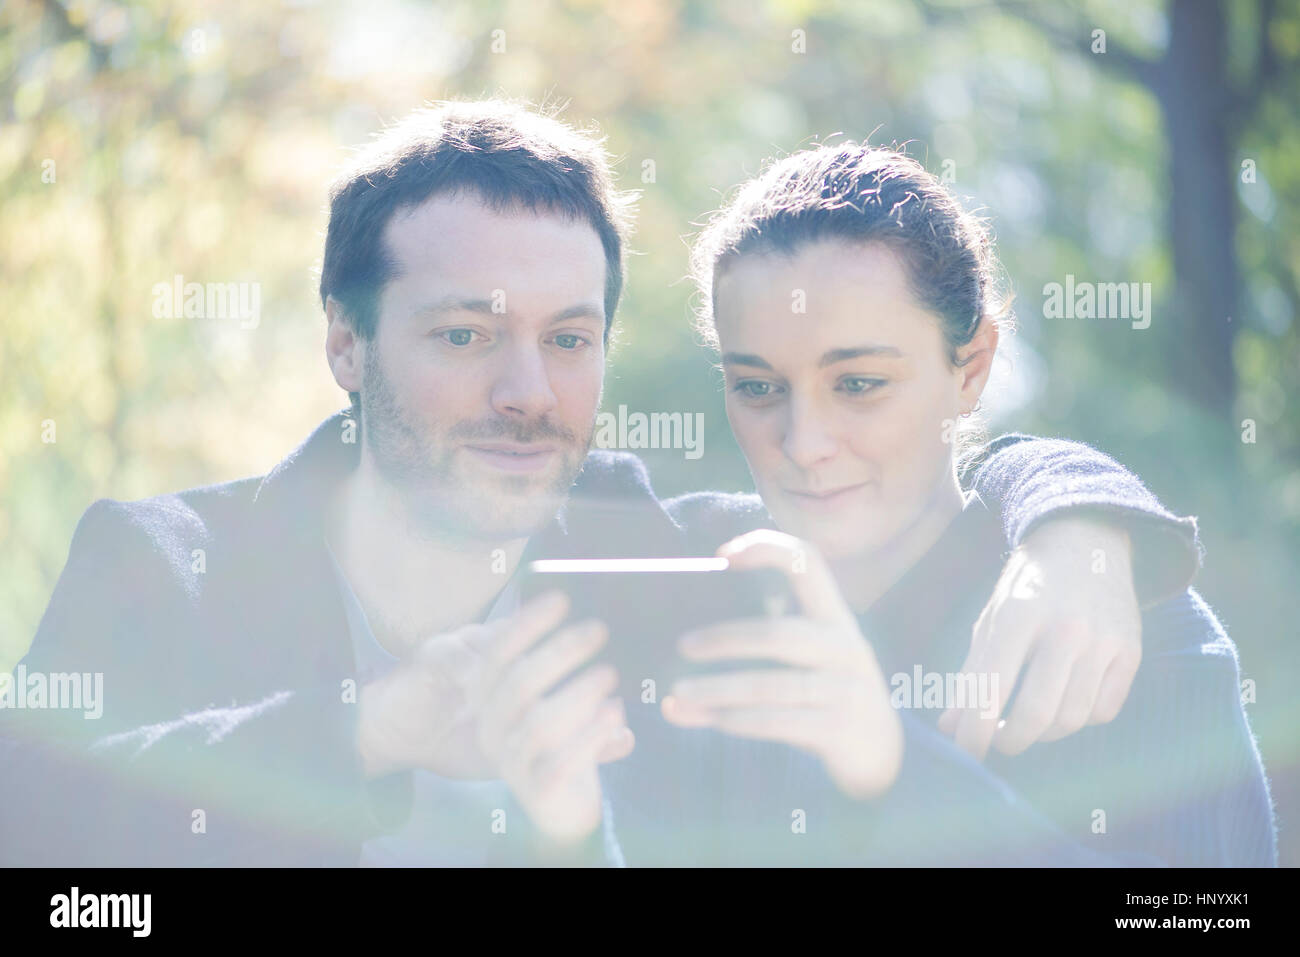 Man getting camera ready for selfie with girlfriend Stock Photo